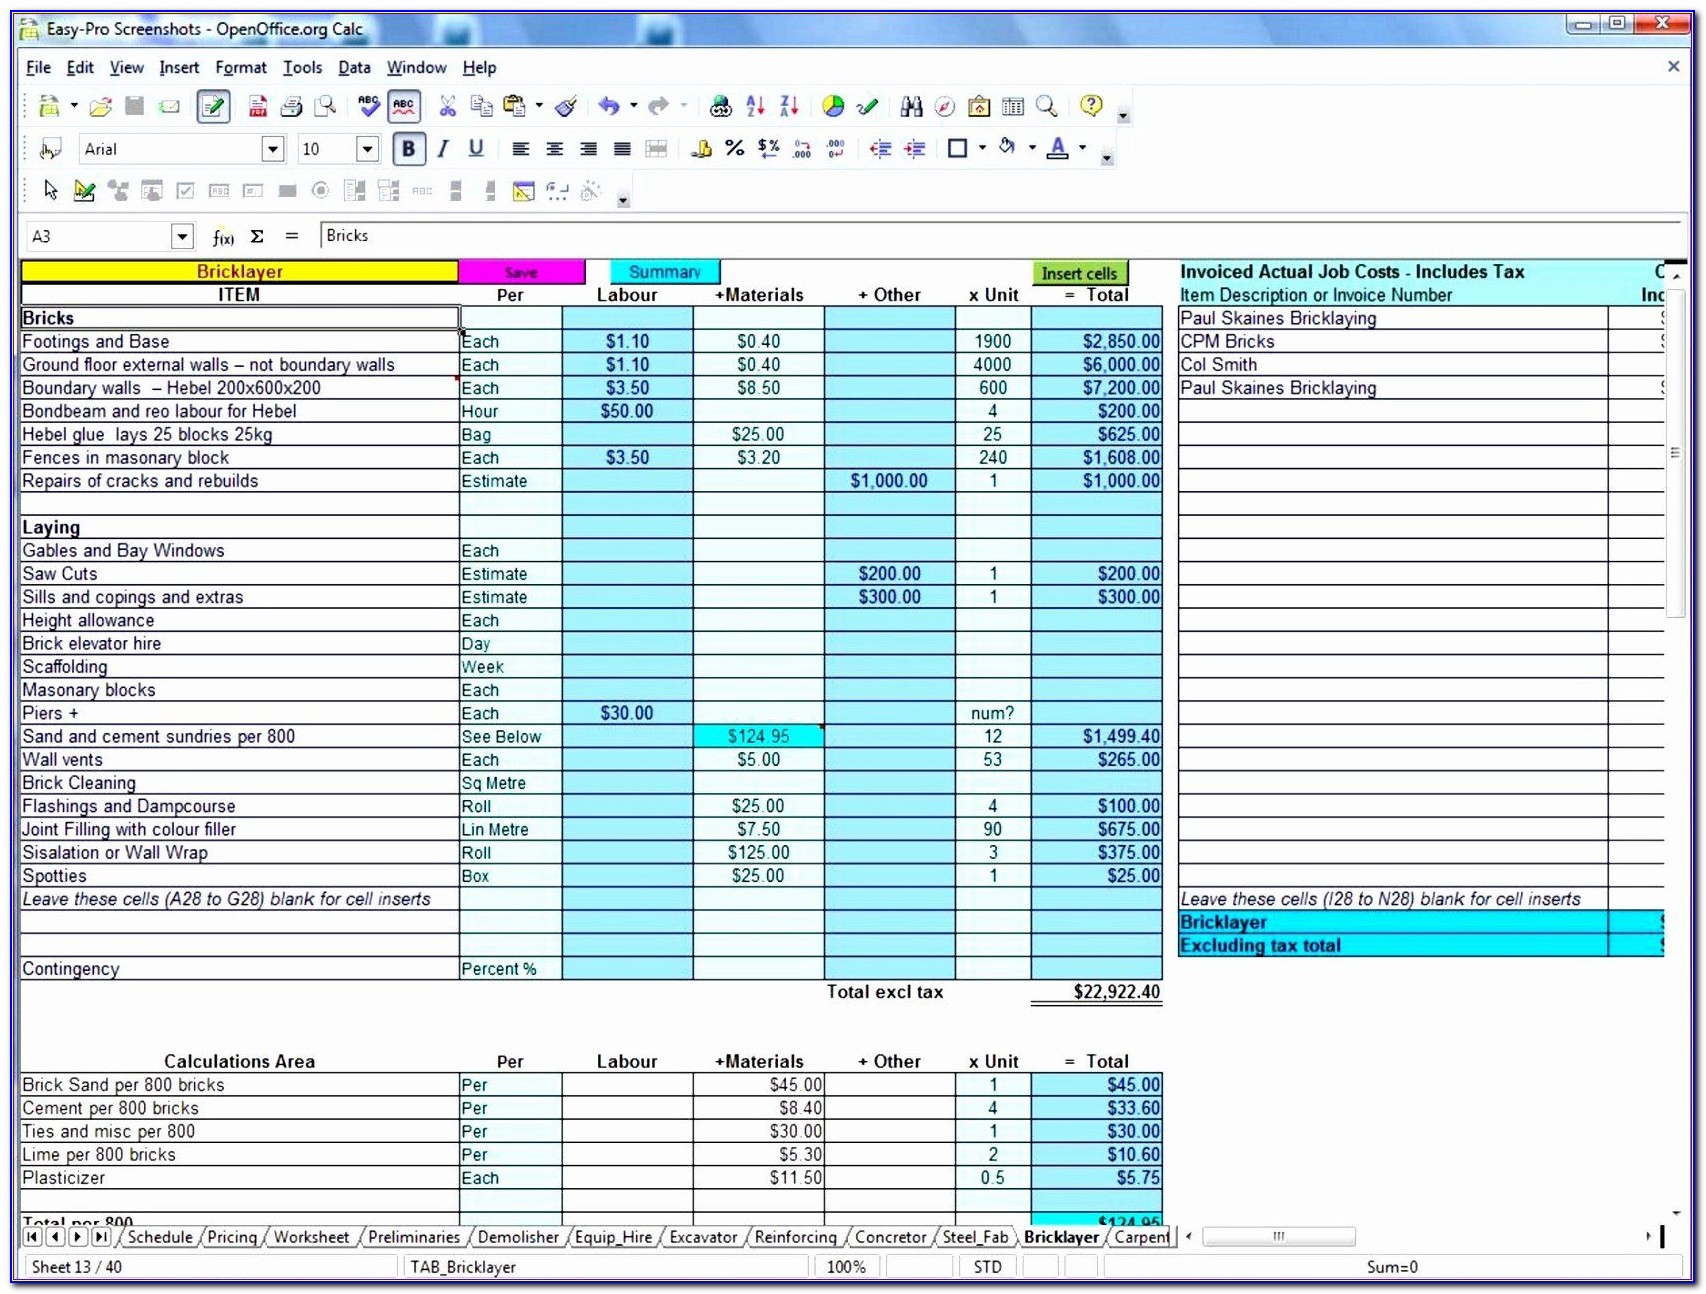 Construction Project Schedule Template Excel